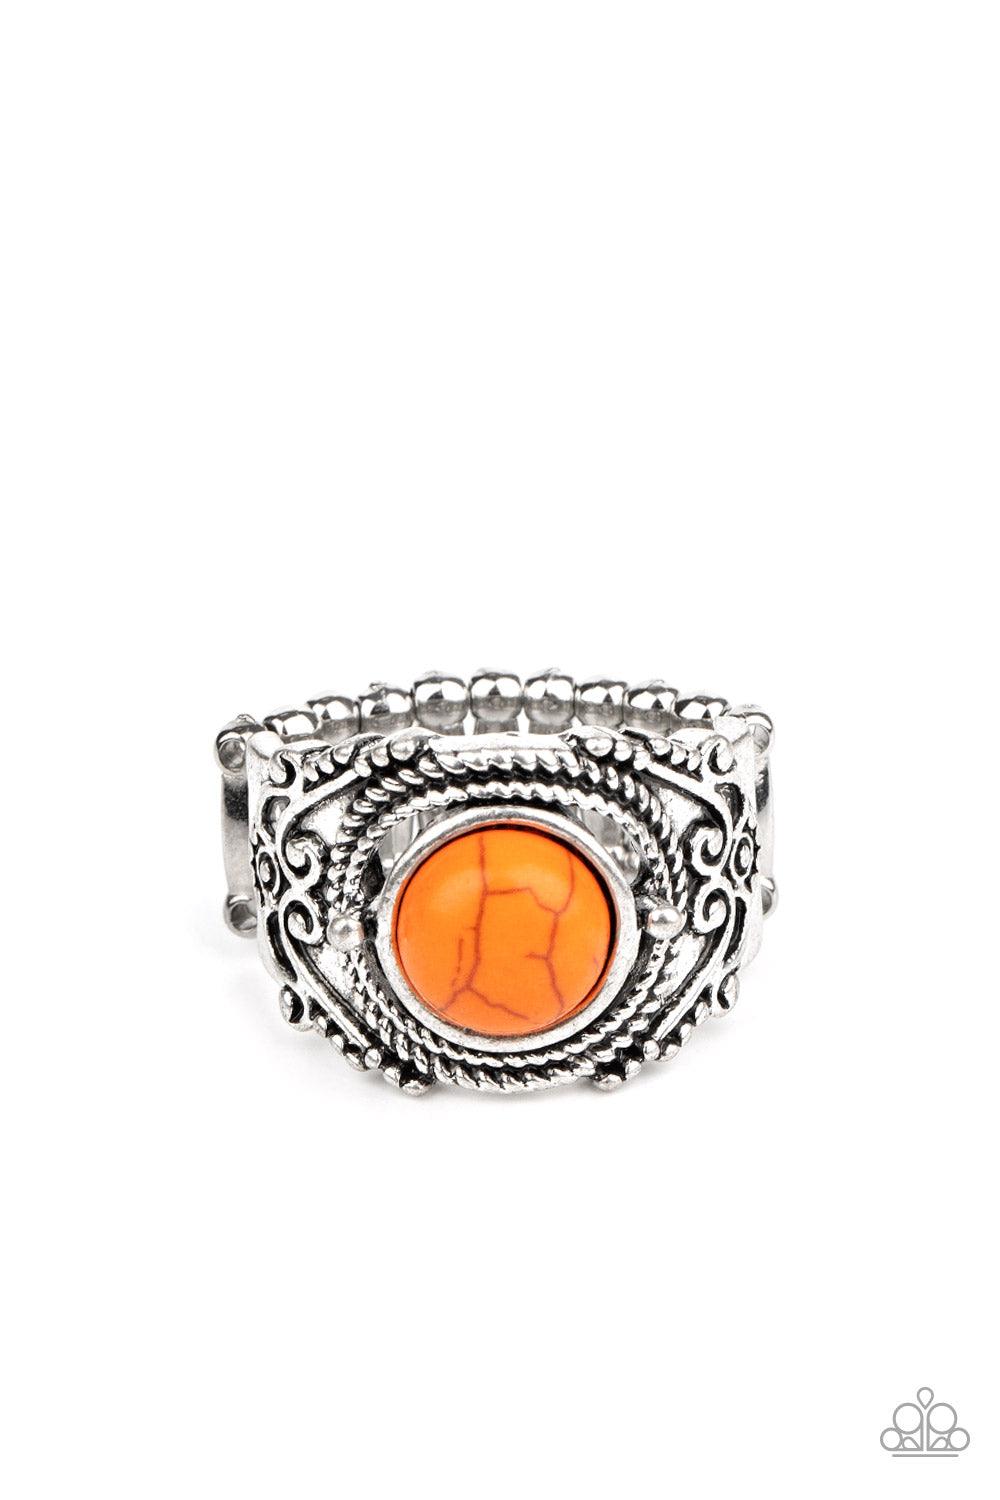 Paparazzi Accessories Stand Your Ground - Orange A refreshing orange stone is pressed into an ornate silver band radiating with rope-like and studded textures for a seasonal look. Features a stretchy band for a flexible fit. Sold as one individual ring. J